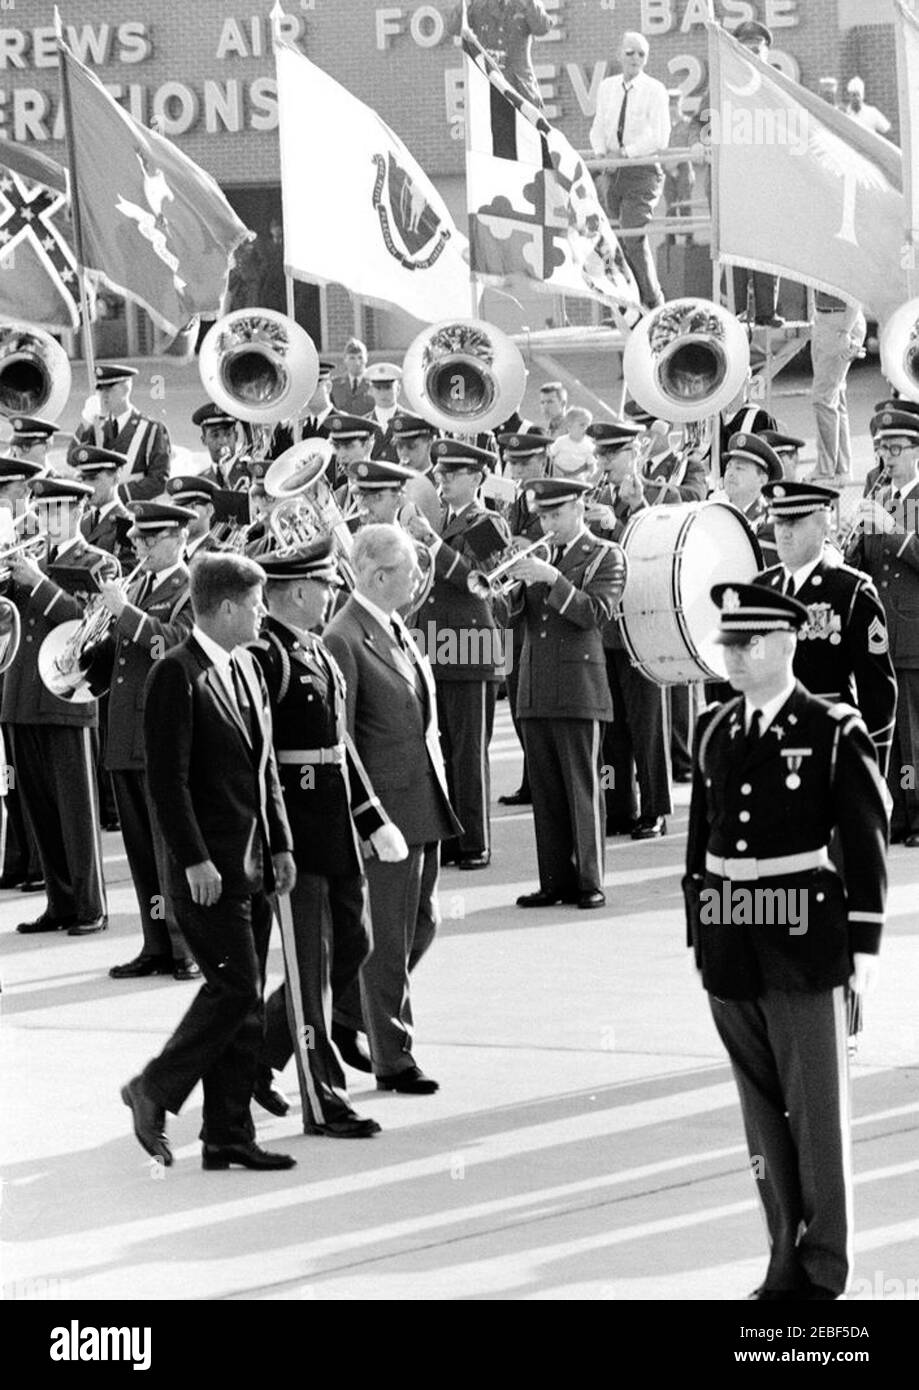 Arrival ceremonies for Harold Macmillan, Prime Minister of Great Britain, 4:50PM. Commander of Troops, Lieutenant Colonel Charles P. Murray, Jr. (center left), escorts President John F. Kennedy and Prime Minister of Great Britain, Harold Macmillan, past an unidentified military band during arrival ceremonies for Prime Minister Macmillan. Andrews Air Force Base, Maryland. Stock Photo